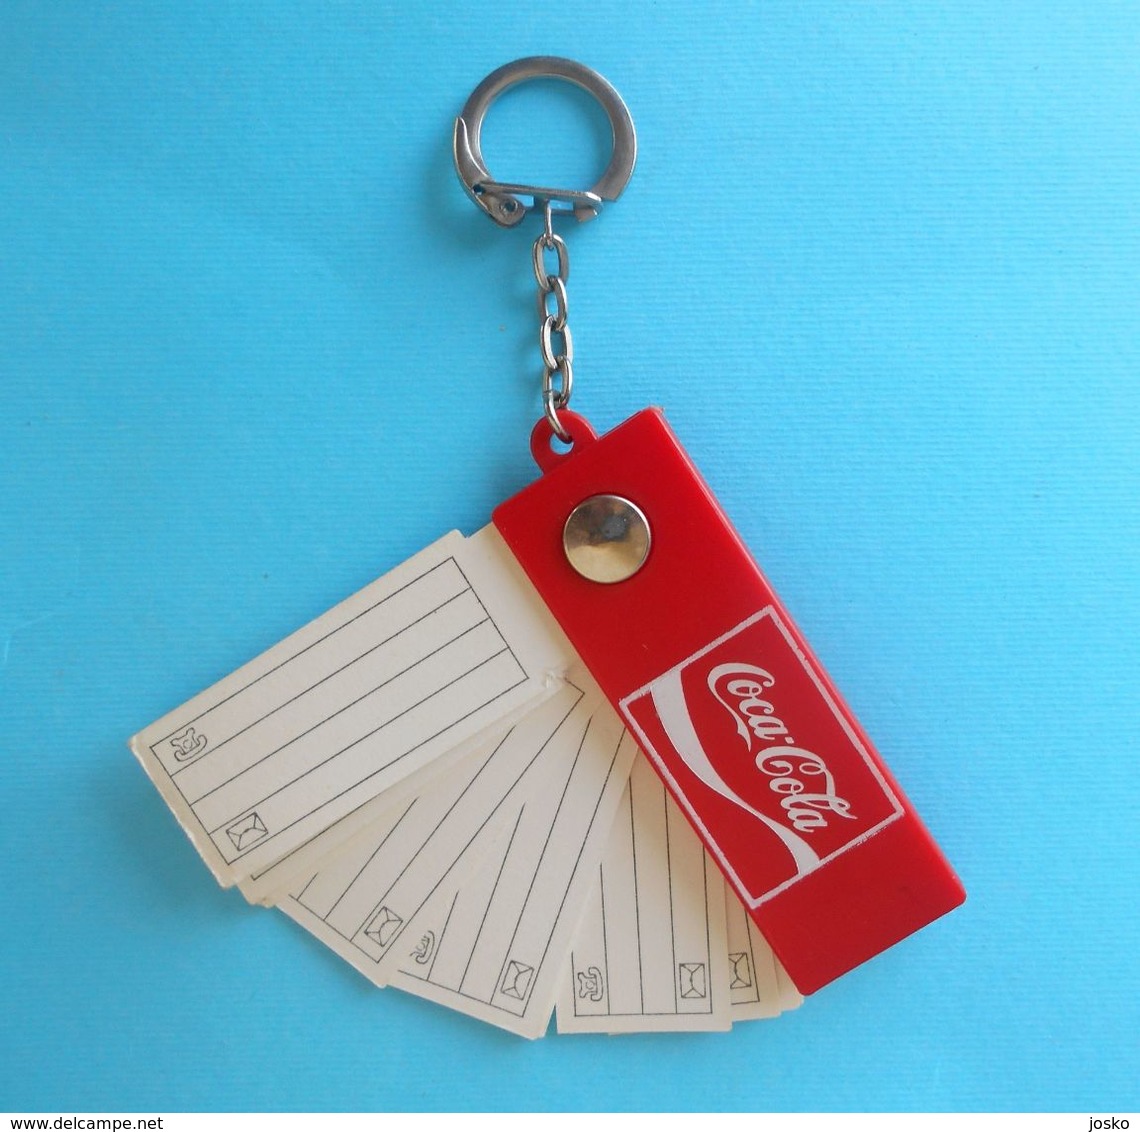 COCA-COLA ... Yugoslavian nice old and very rare keychain 1970's * keyring key-ring porte-clés schlüsselring